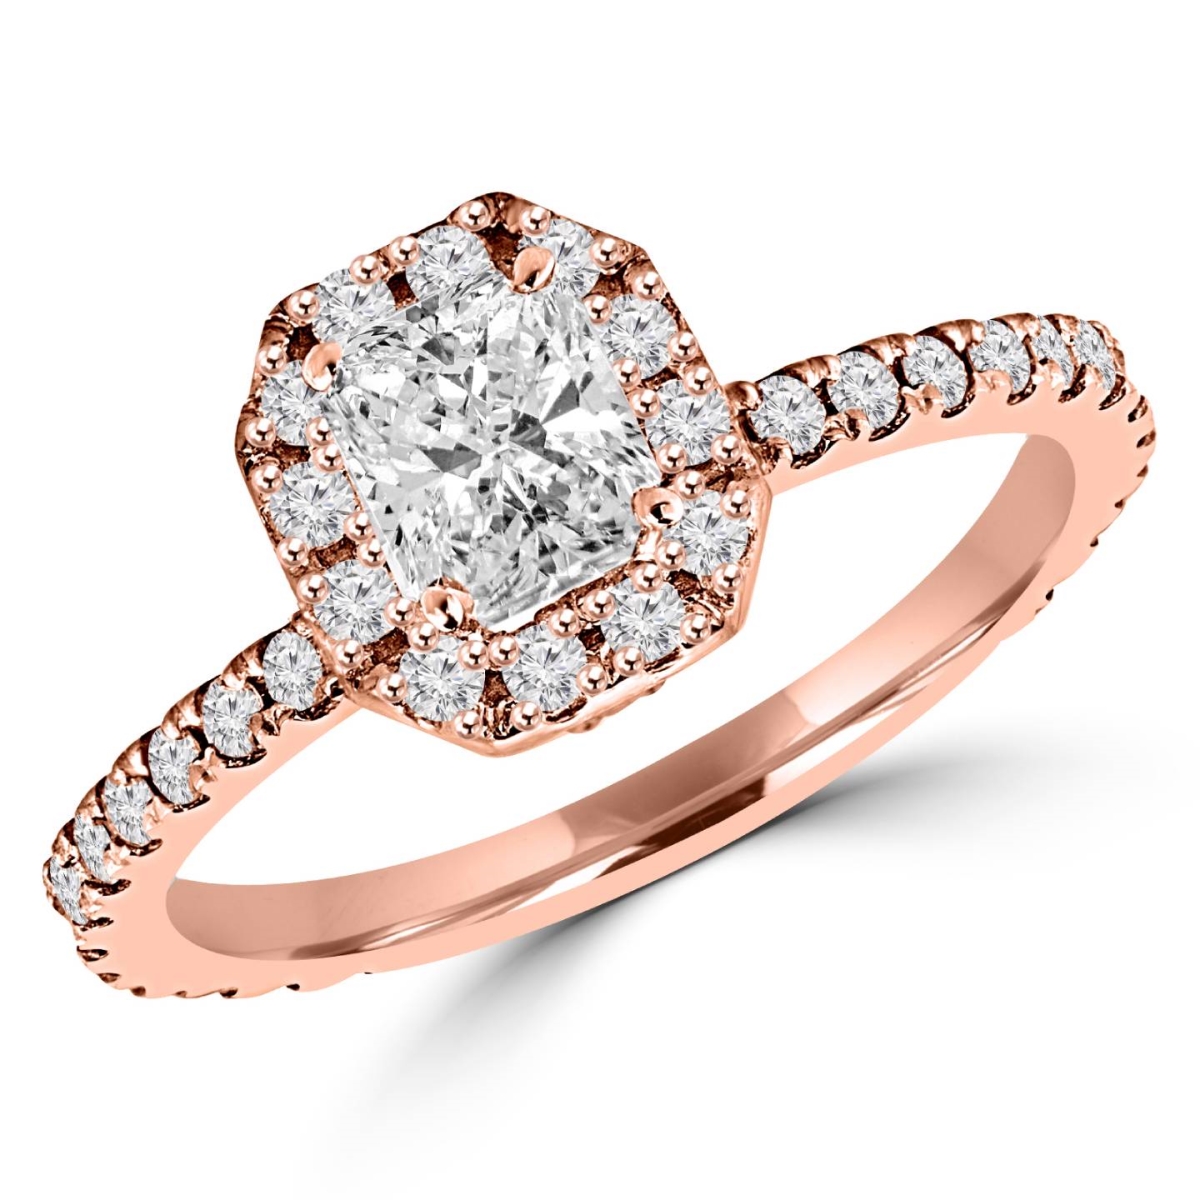 MD150189-3.5 0.75 CTW Antique Vintage Radiant Cut Diamond Halo Engagement Ring in 14K Rose Gold, Size 3.5